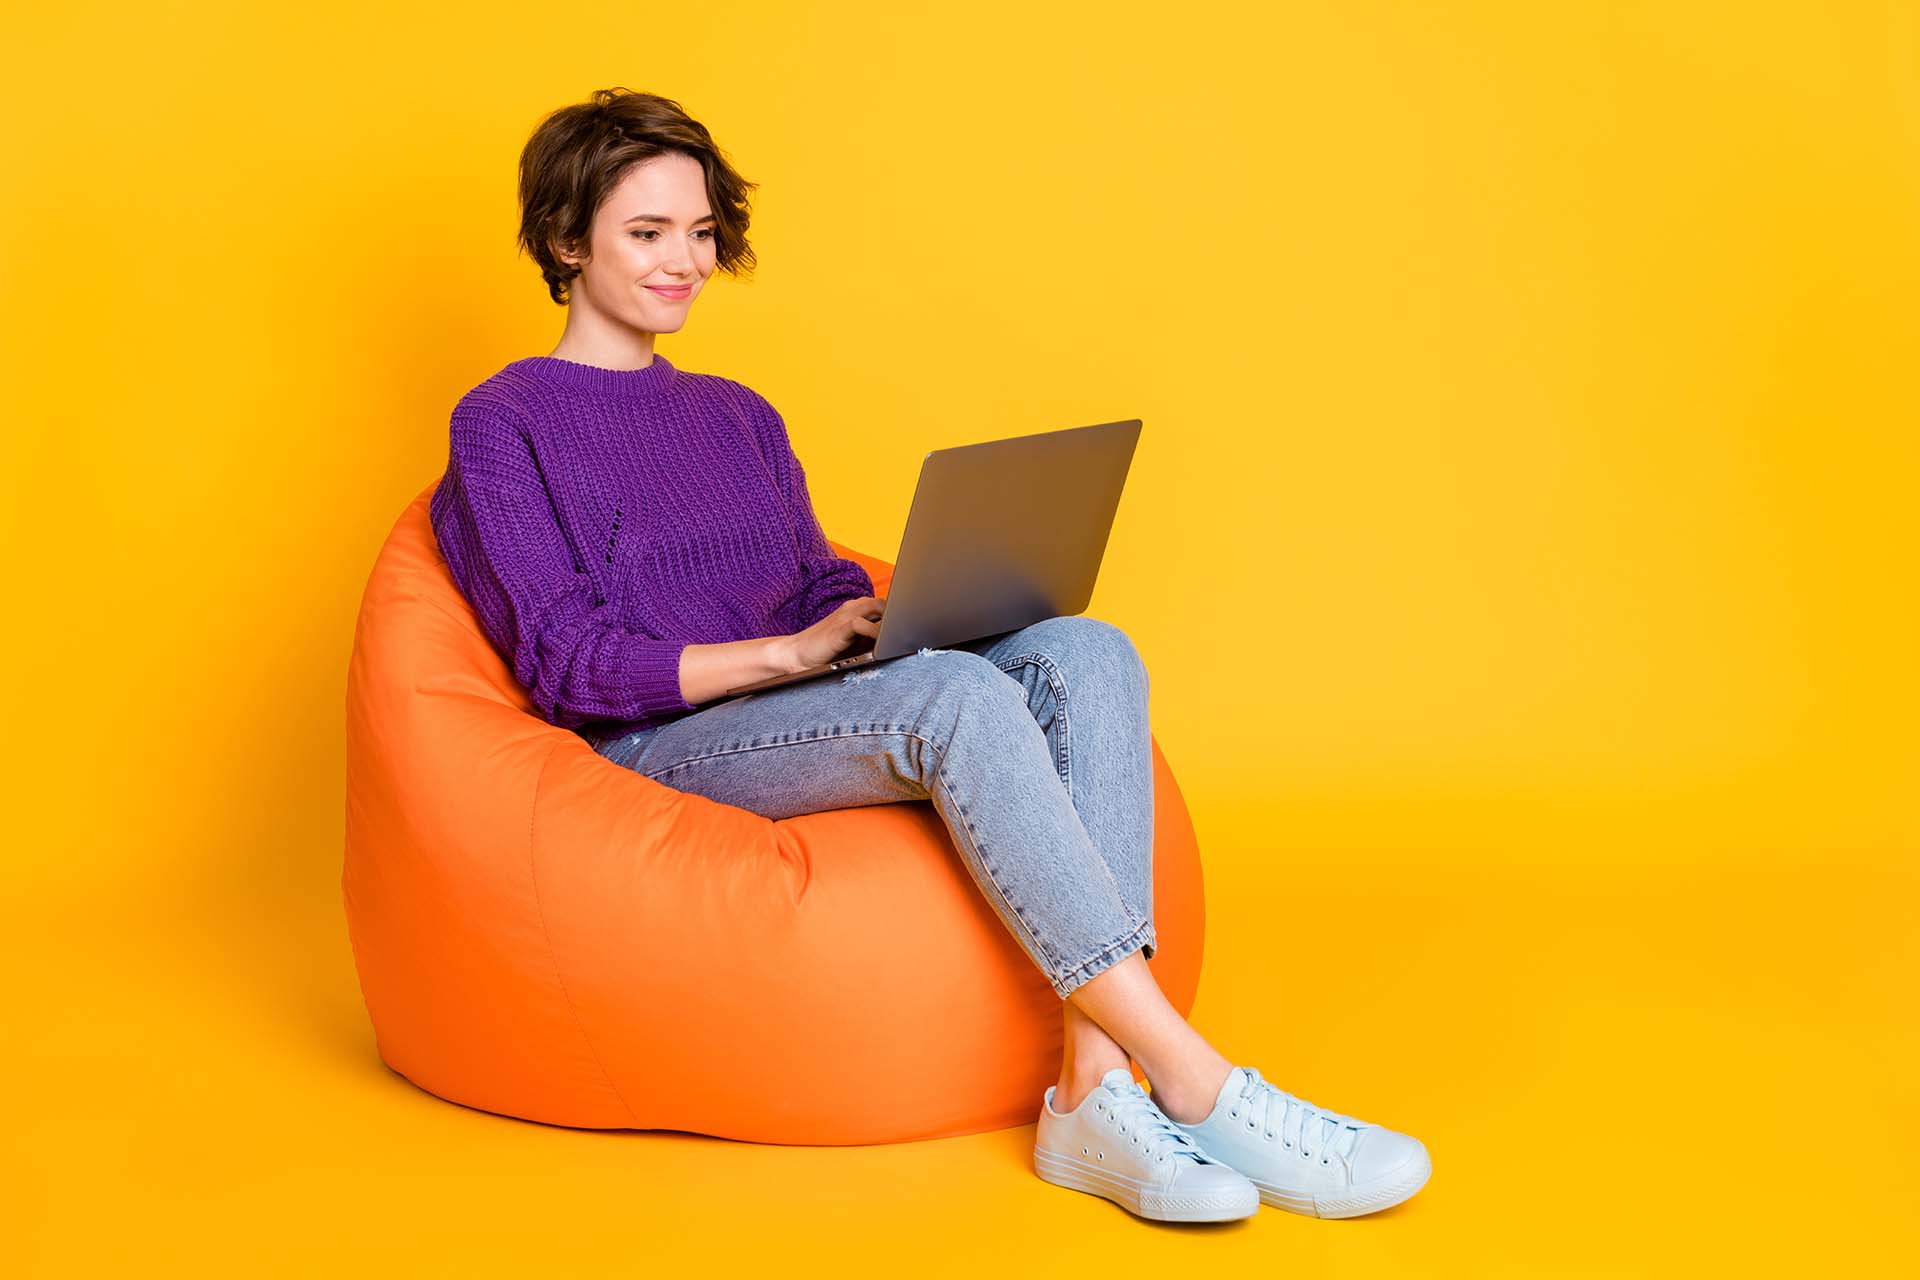 How to Write a Press Release a lady in a purple jumper sitting on an orange bean bag